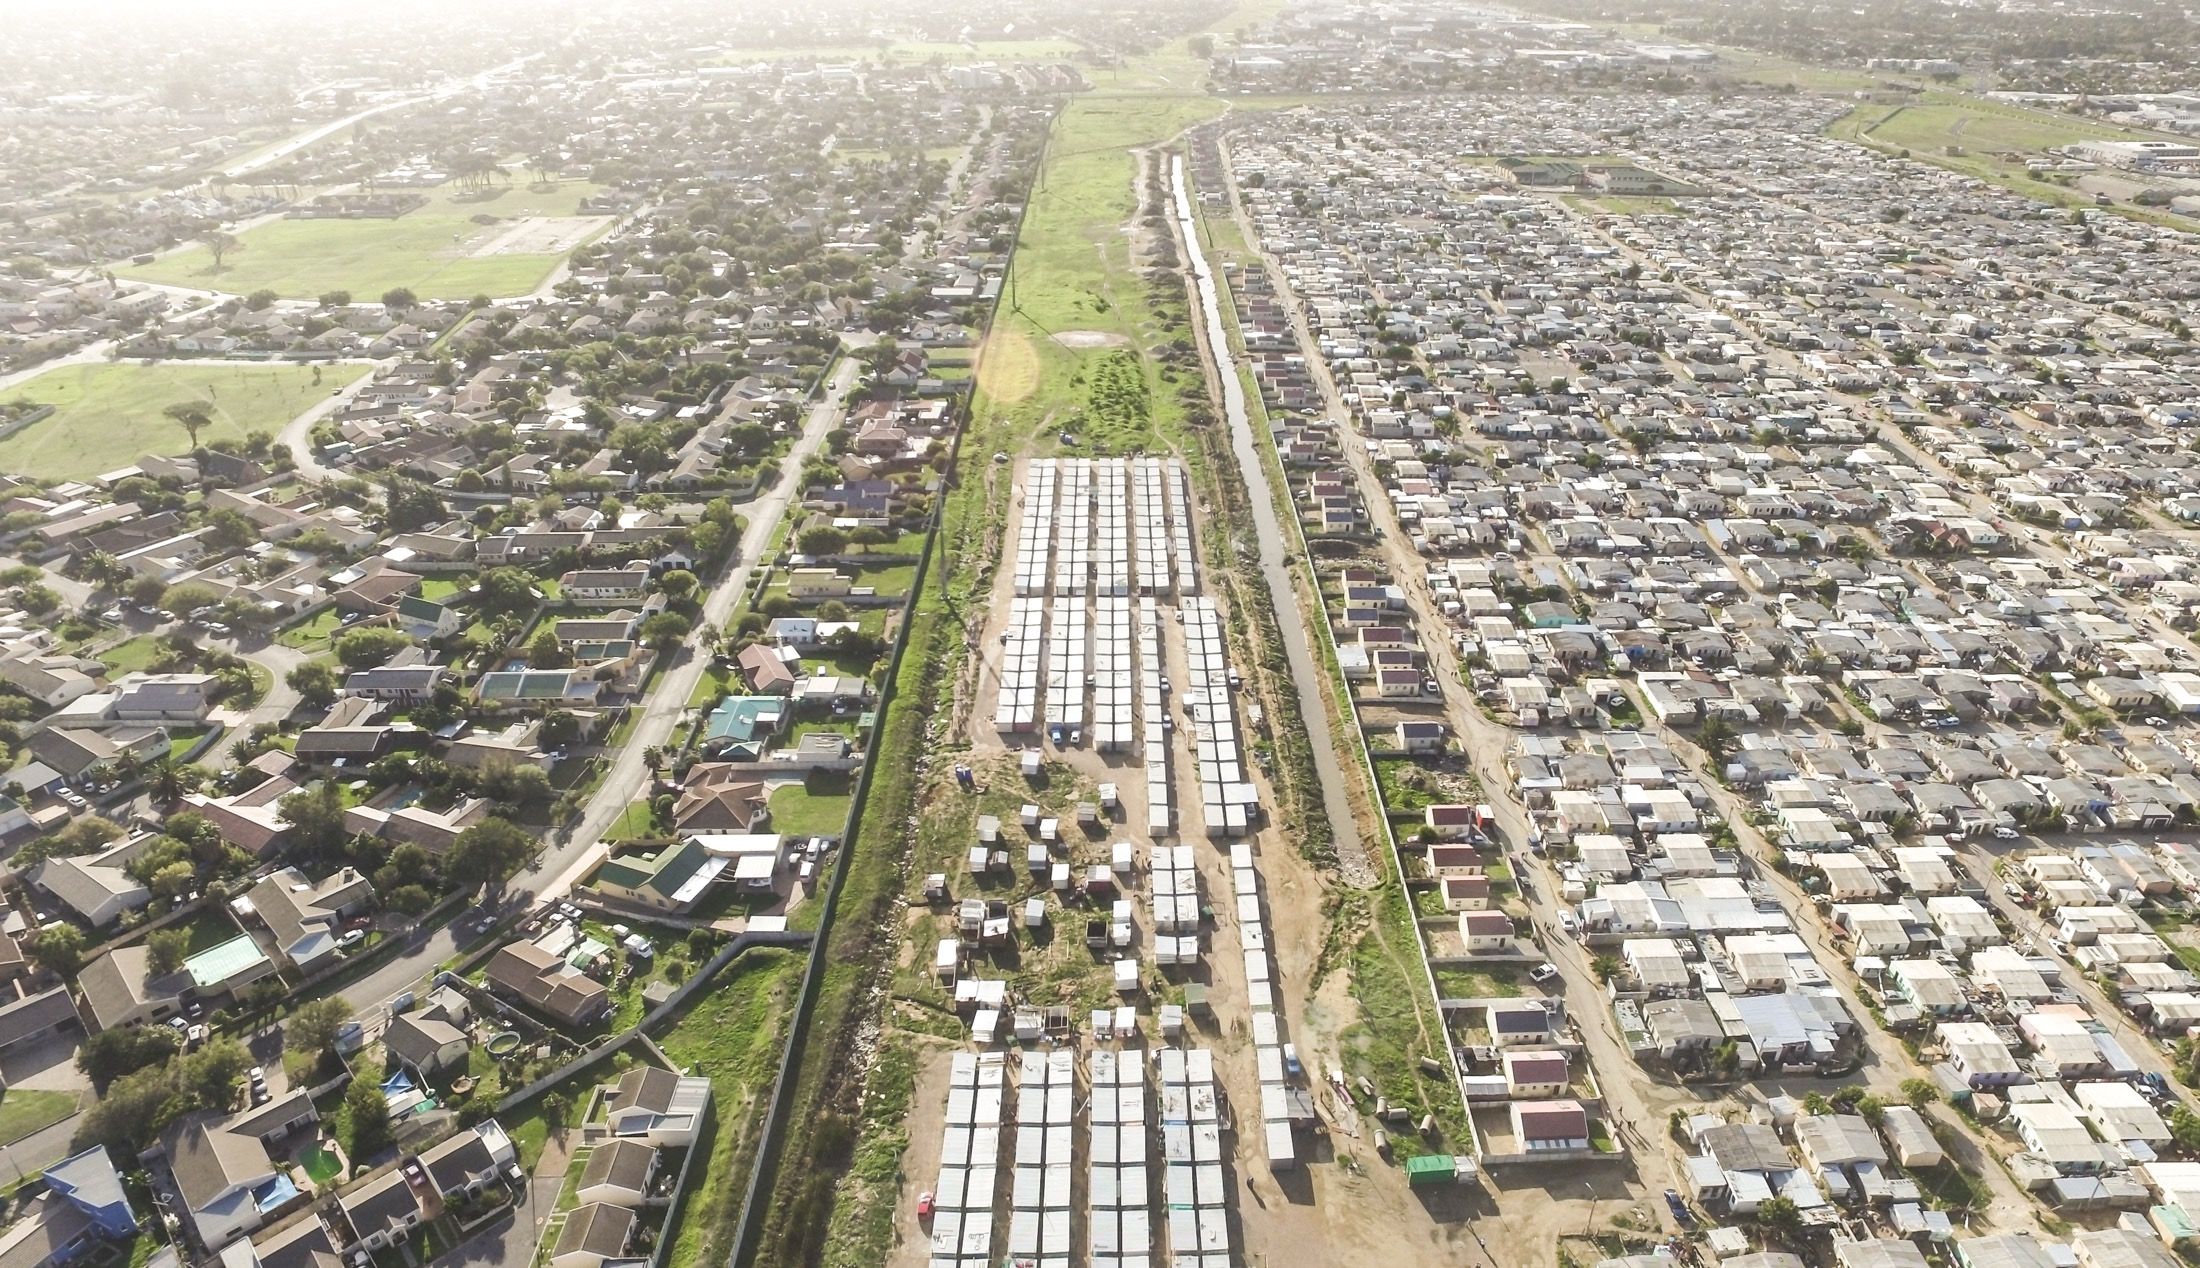 Drone images show the “architecture of apartheid” in Cape Town is ...